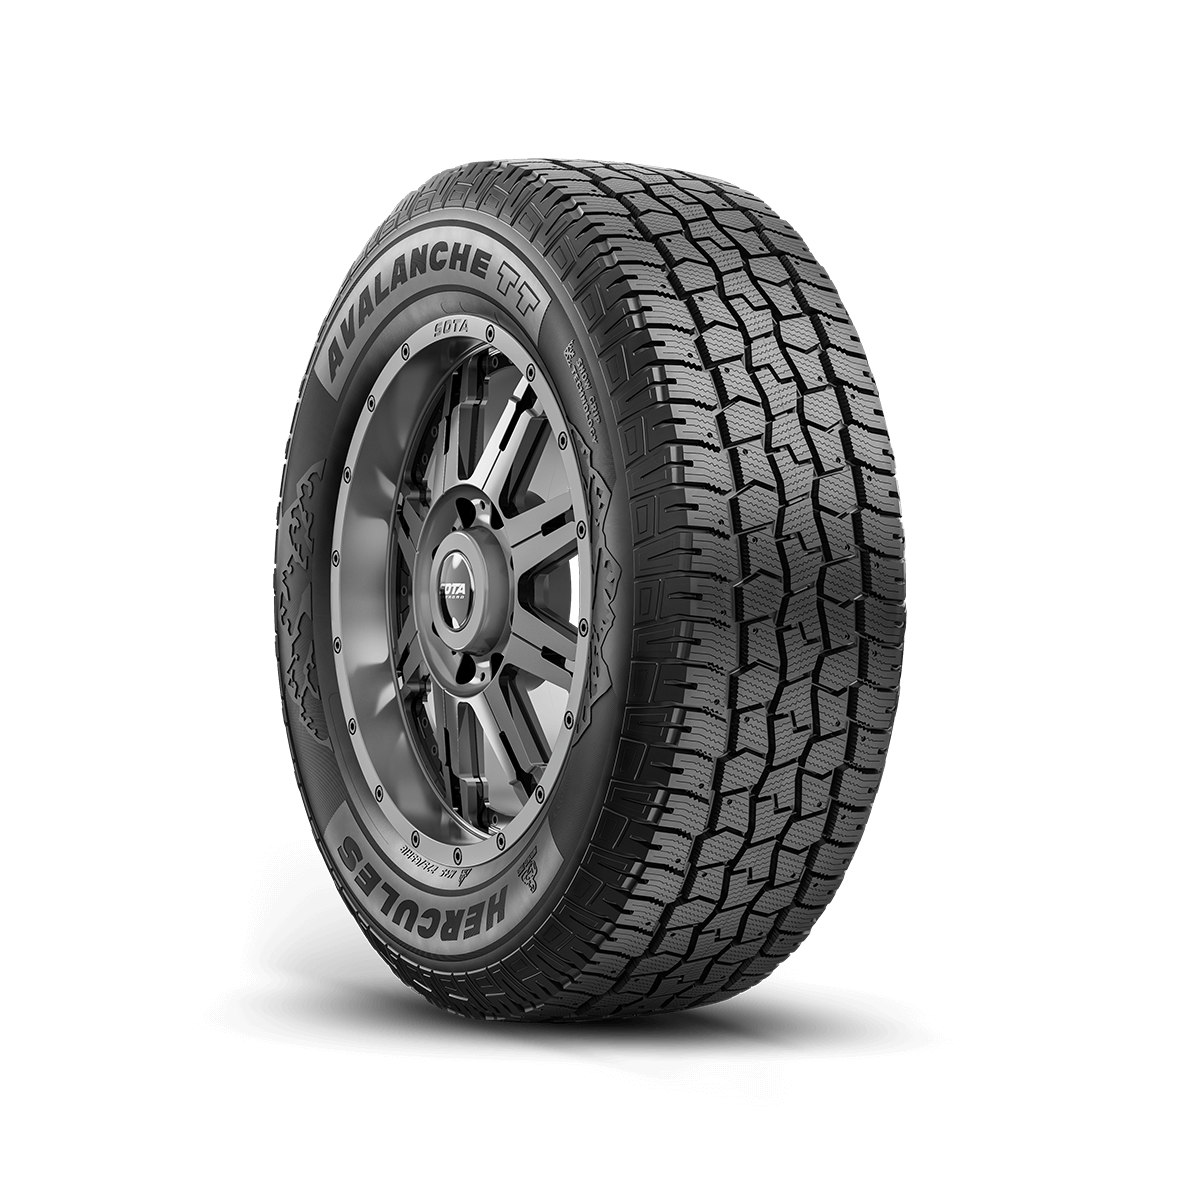 Avalanche® TT | Tires by Name